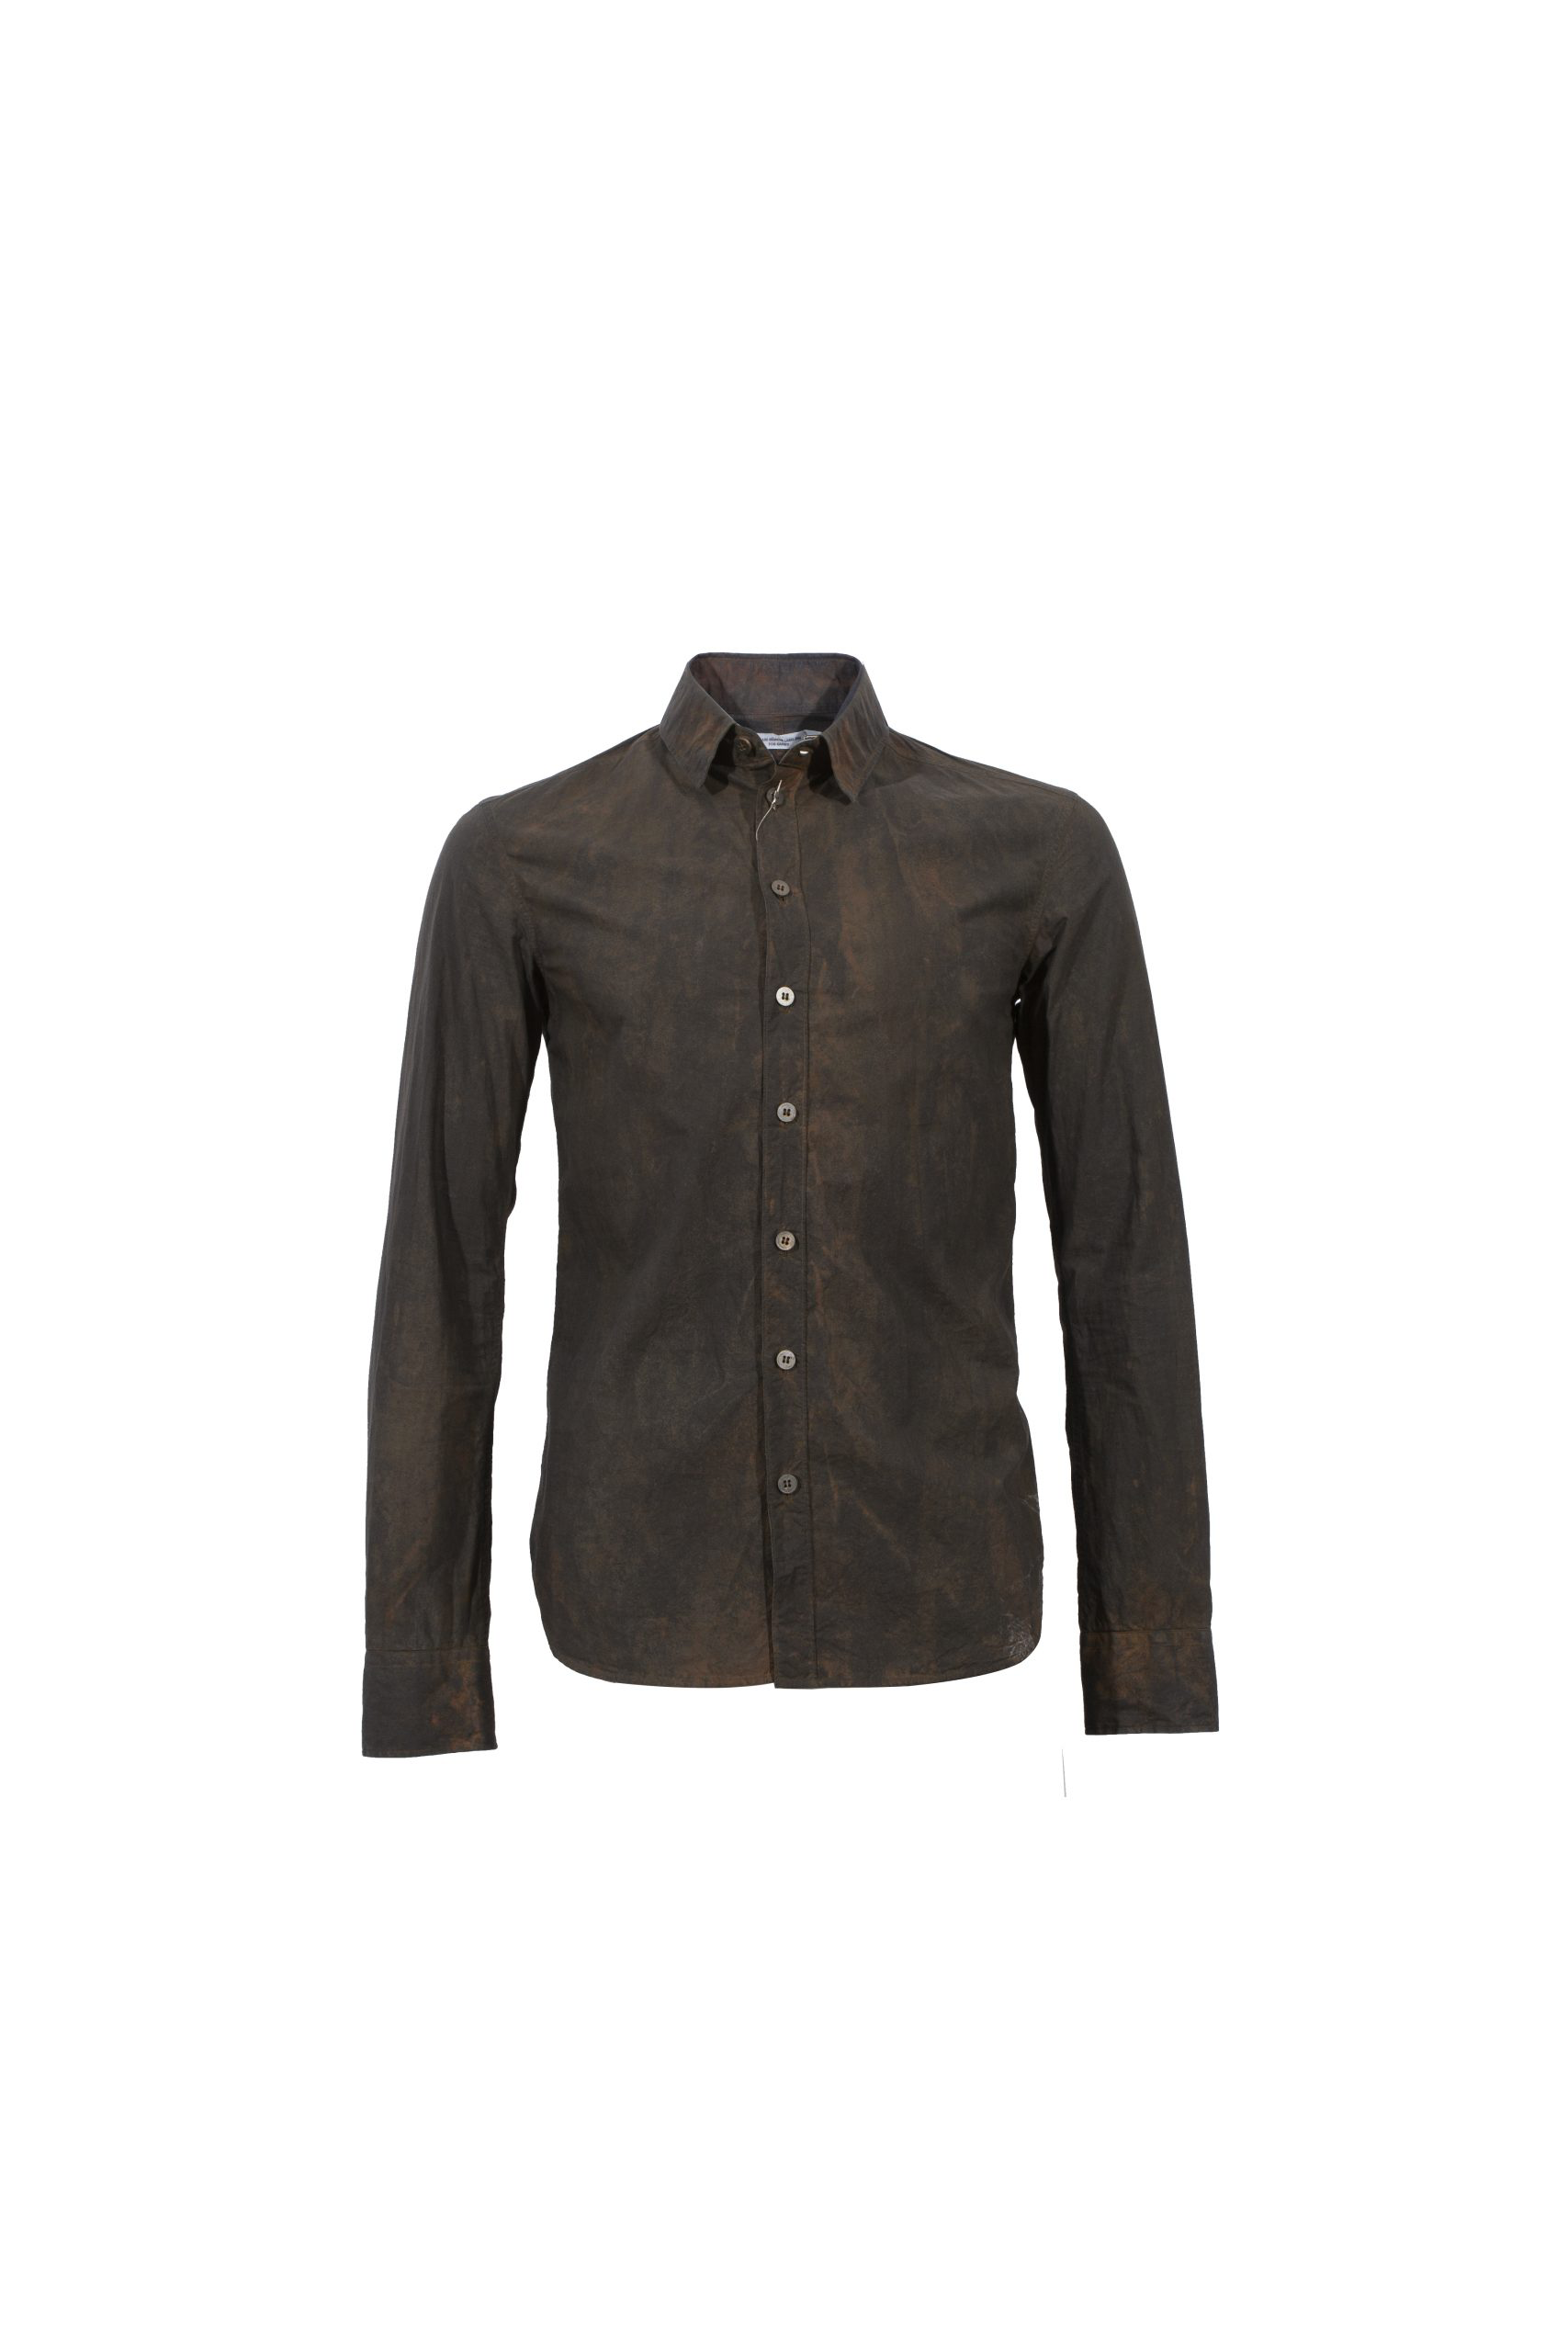 S-139 CLASSIC SHIRT （WITH METAL BUTTONS）